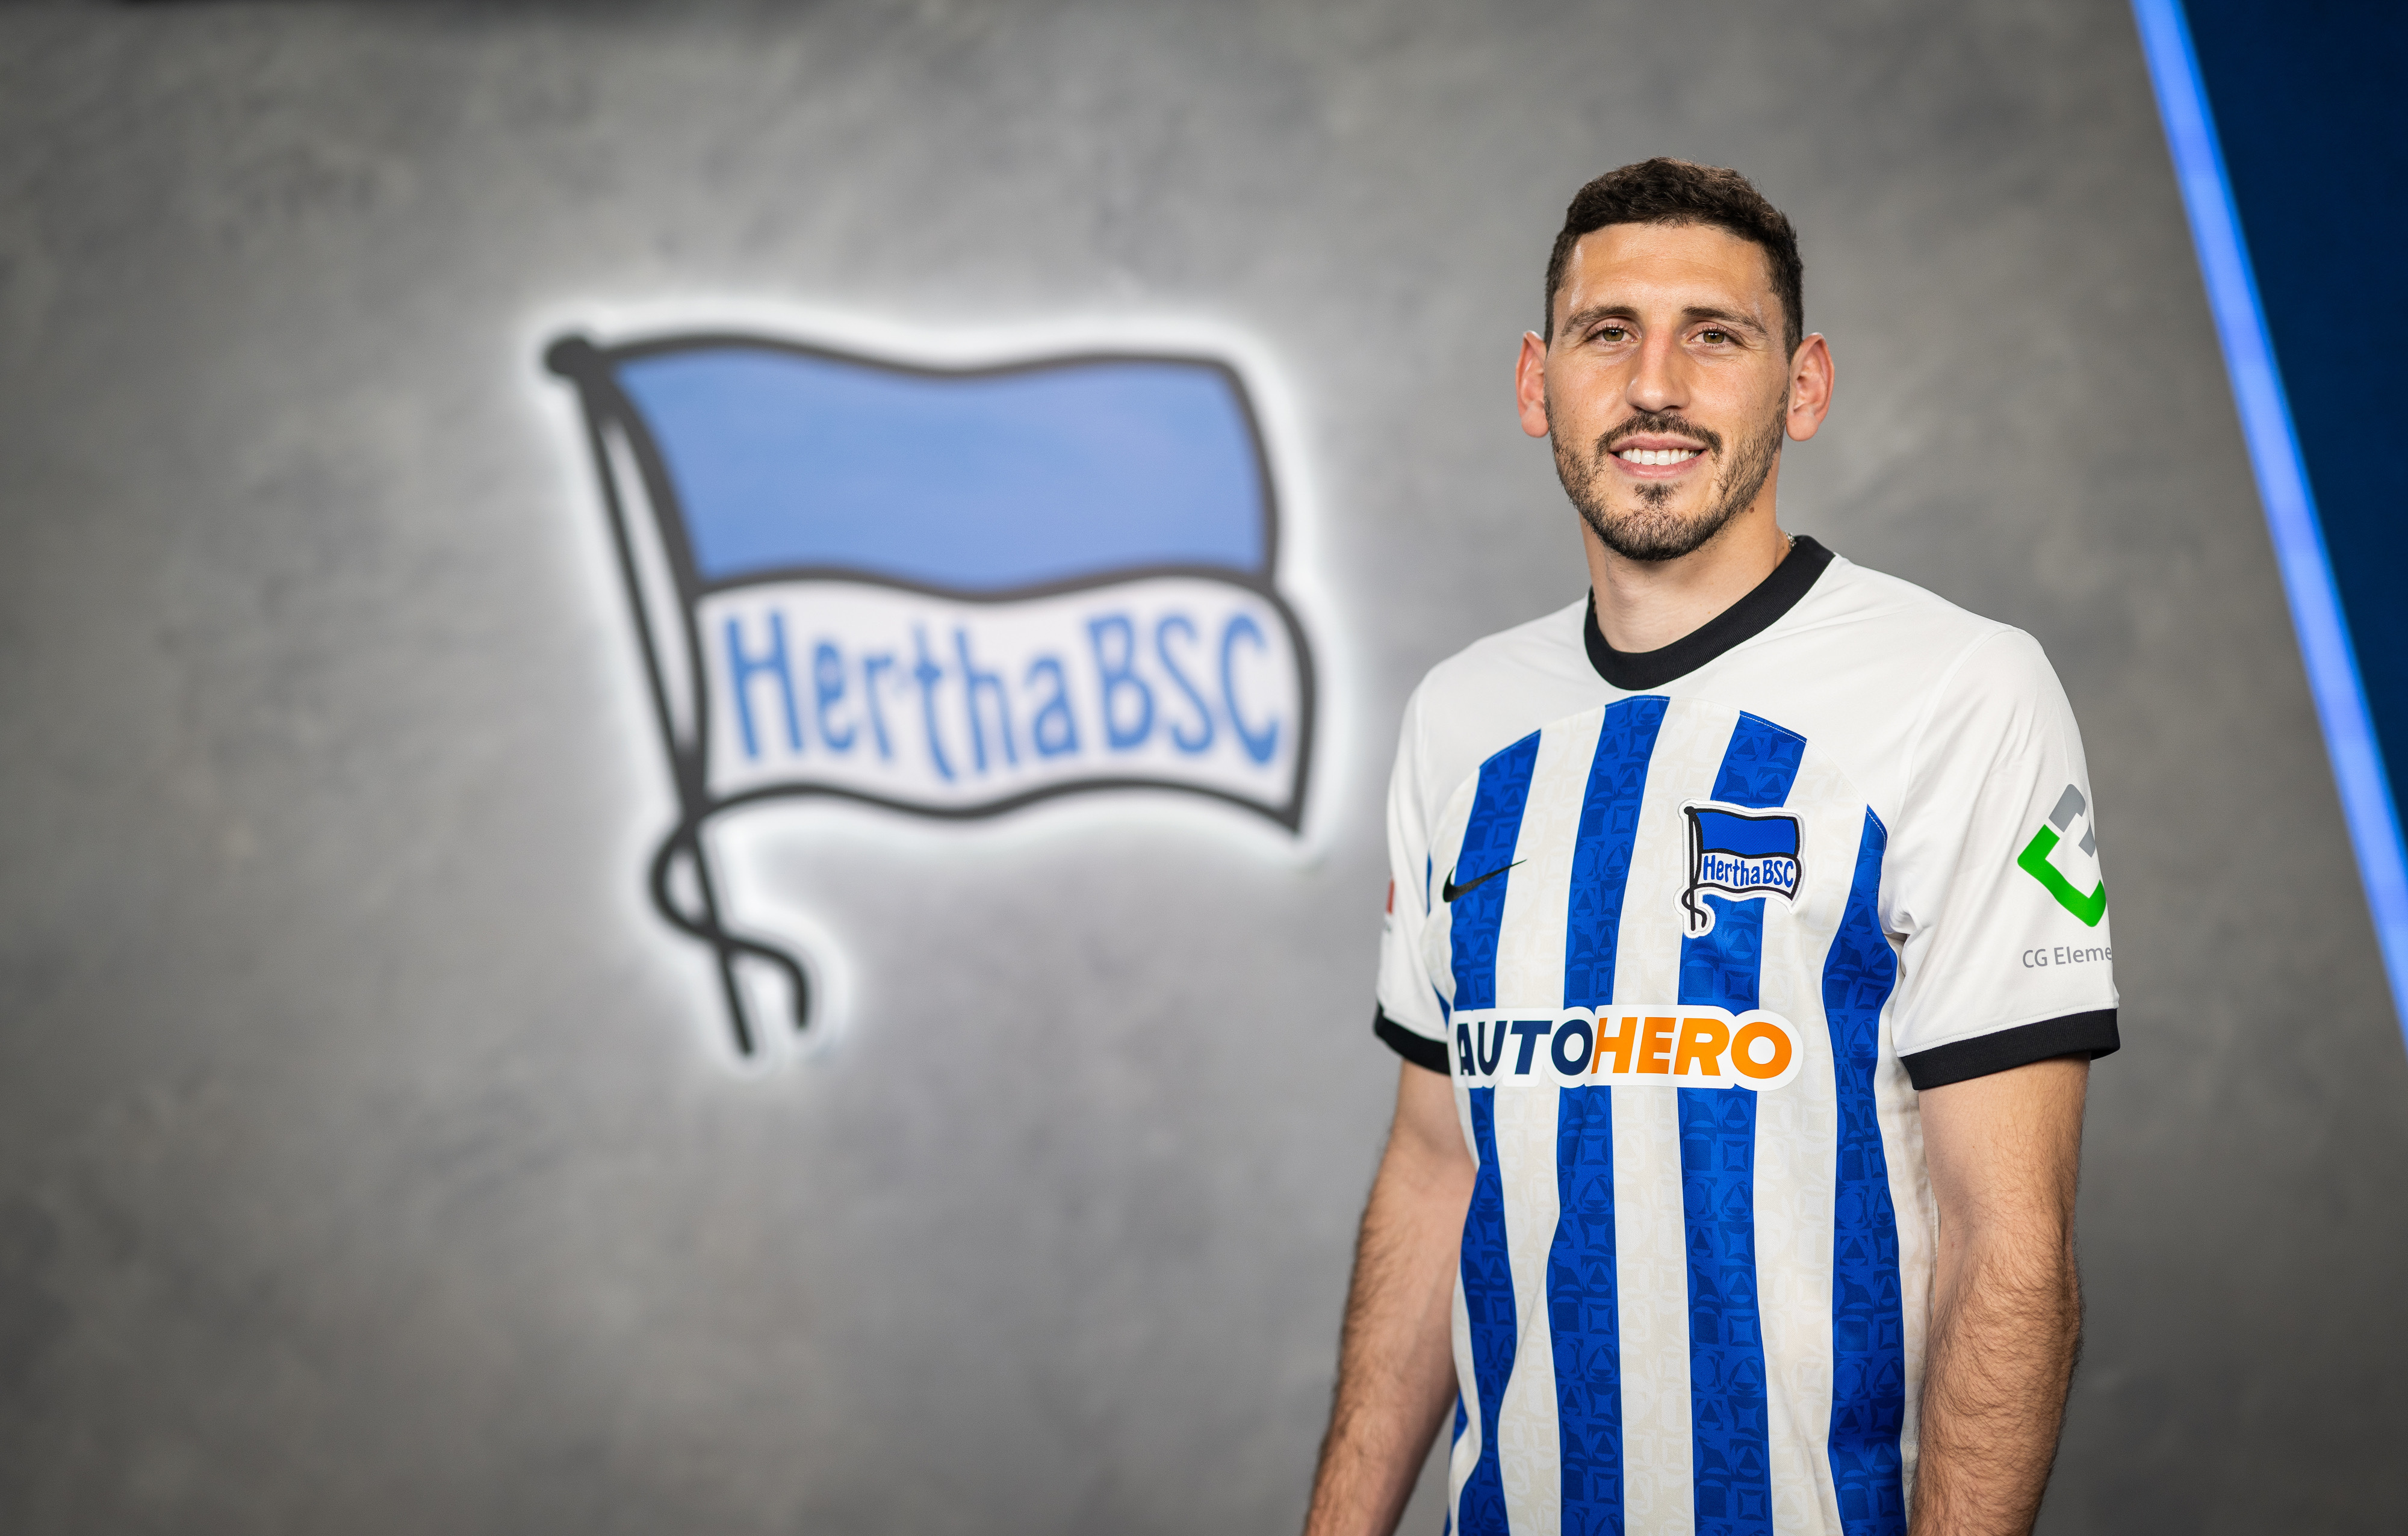 Agustín Rogel wearing the Hertha shirt in front of the club logo.